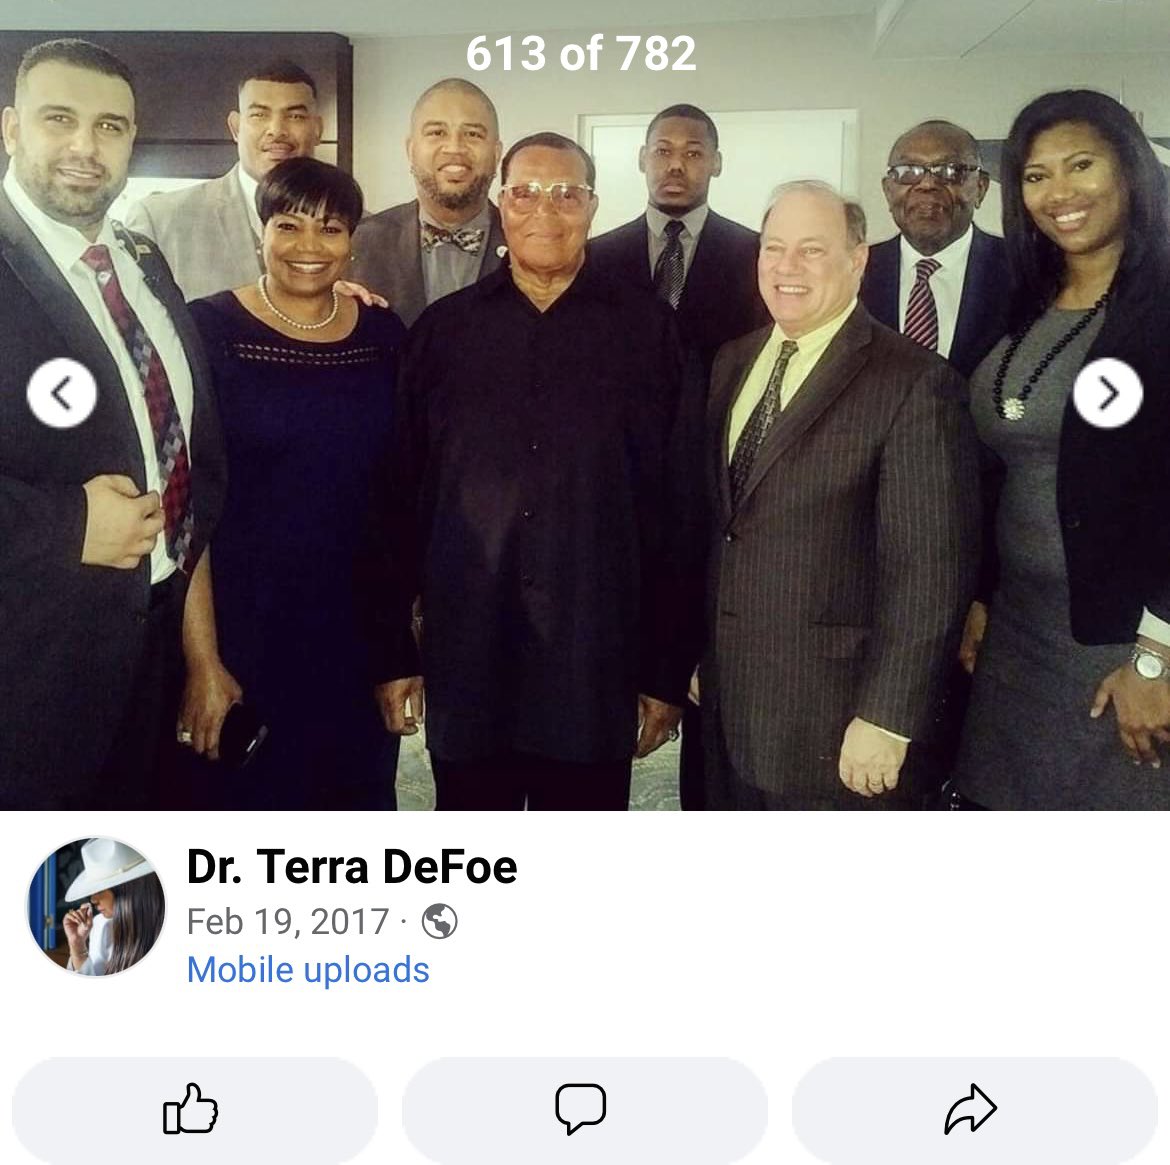 NEW: A top adviser to @RepSlotkin, who is running for the Senate in Michigan, posted a photo with notorious antisemite Louis Farrakhan in 2017. Also pictured: Detroit mayor Mike Duggan, who Biden recently praised. Reporting from @AndyMarkMiller and me foxnews.com/politics/top-a…